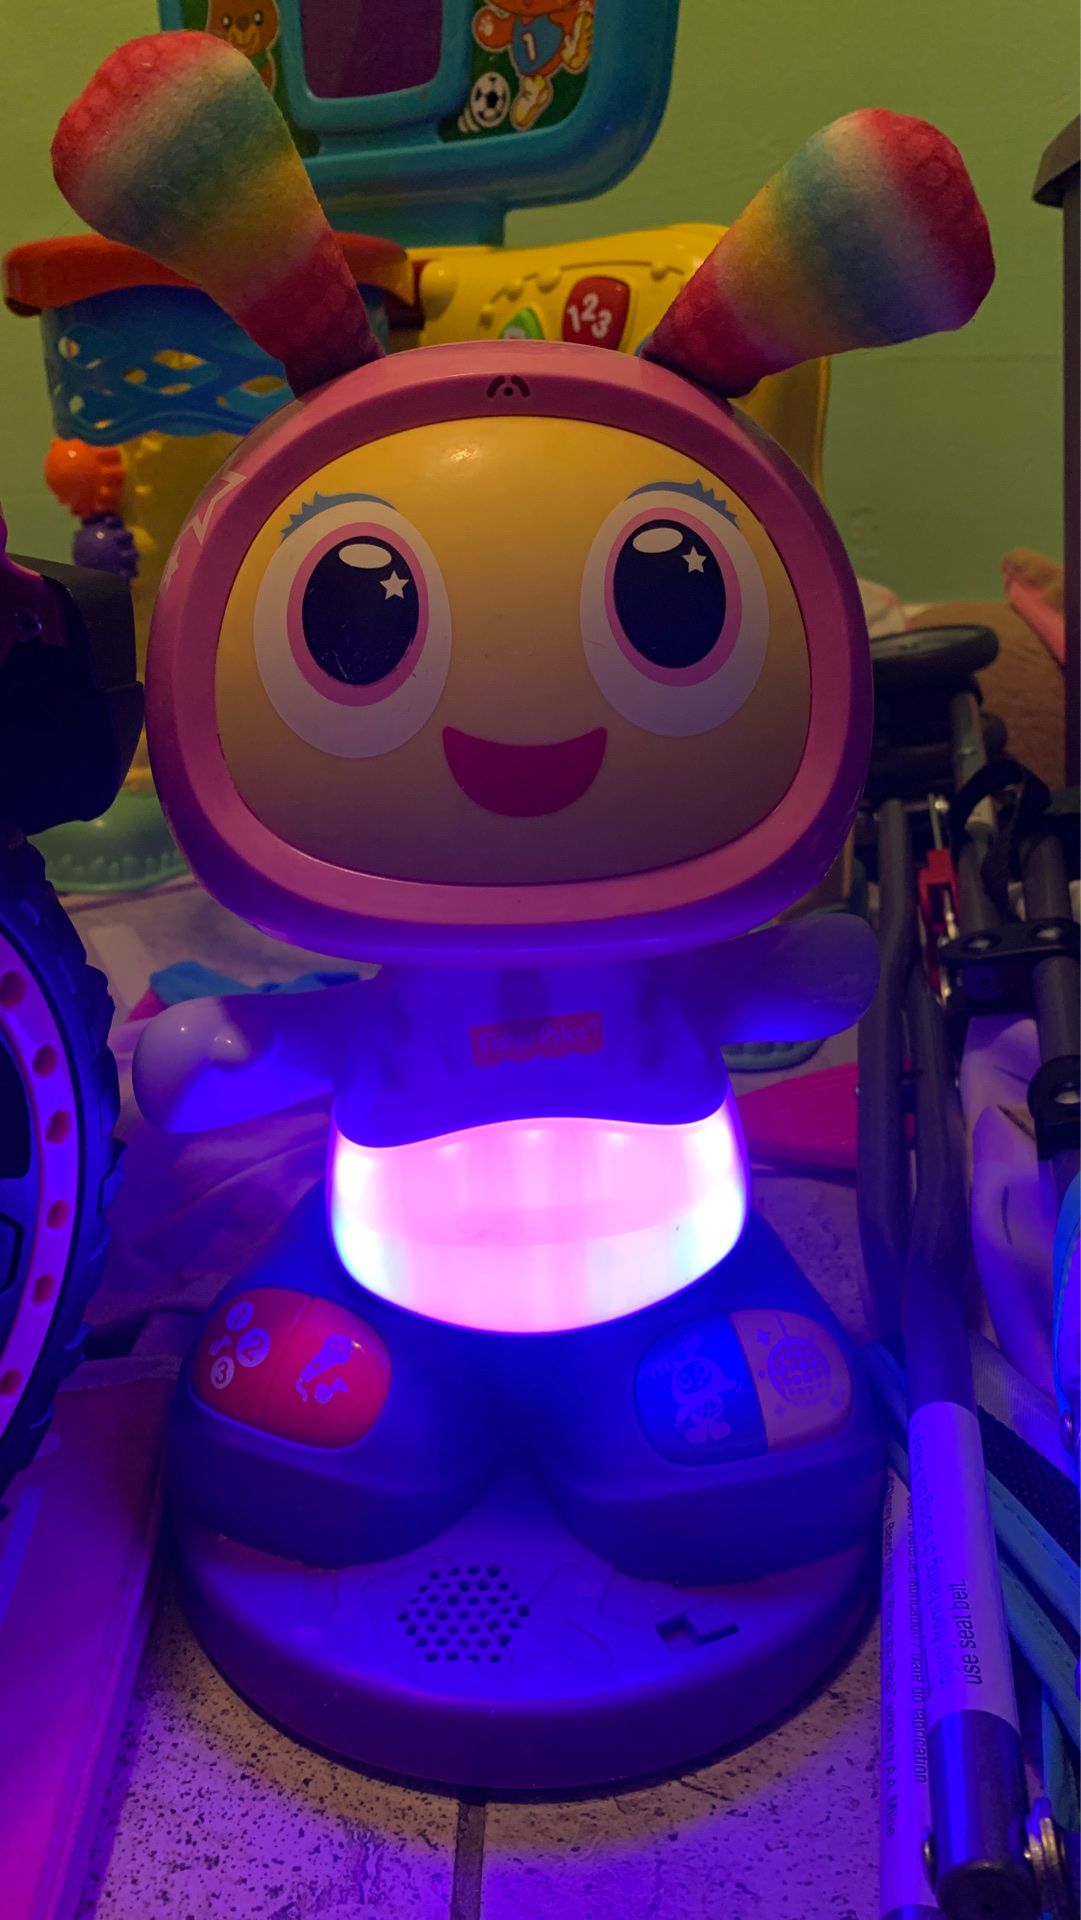 Fisher Price Dance & Move Light-up toy